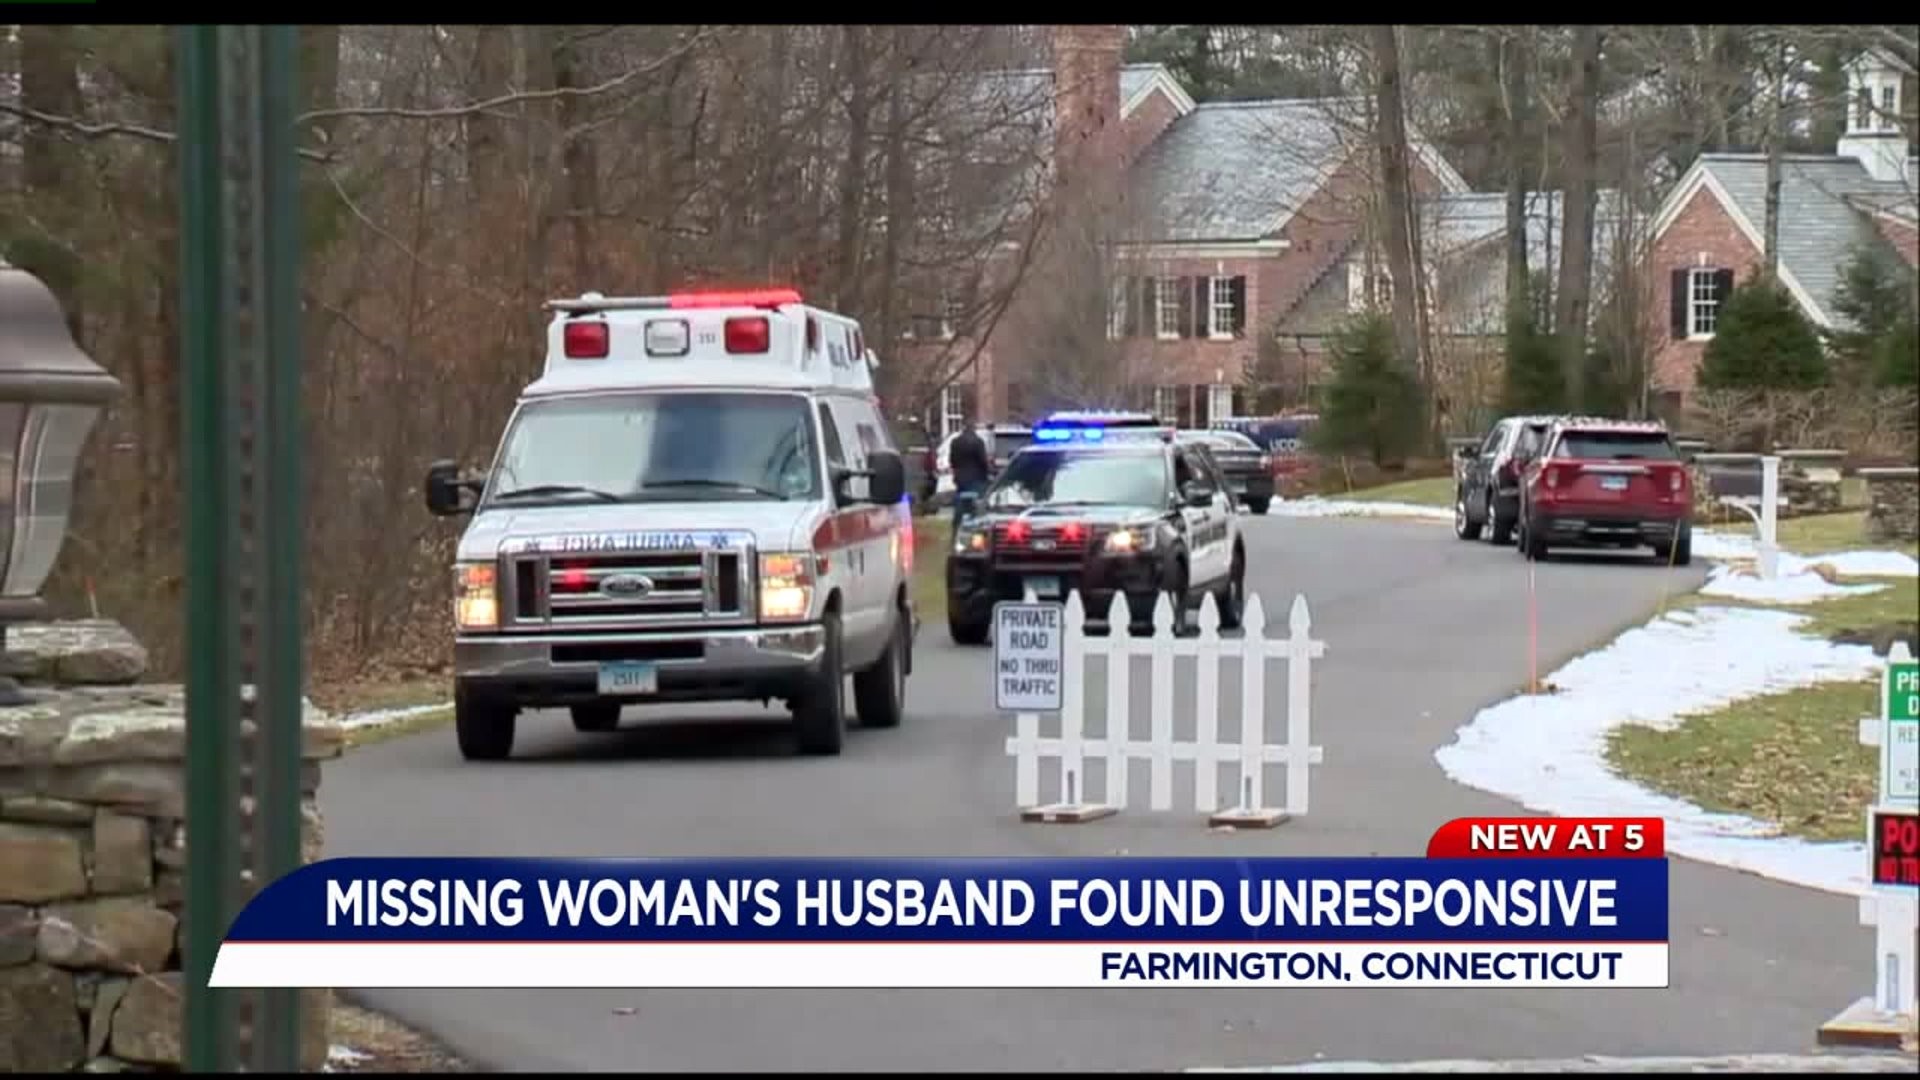 Connecticut man accused of killing wife, believed to have attempted suicide, 2 sources say